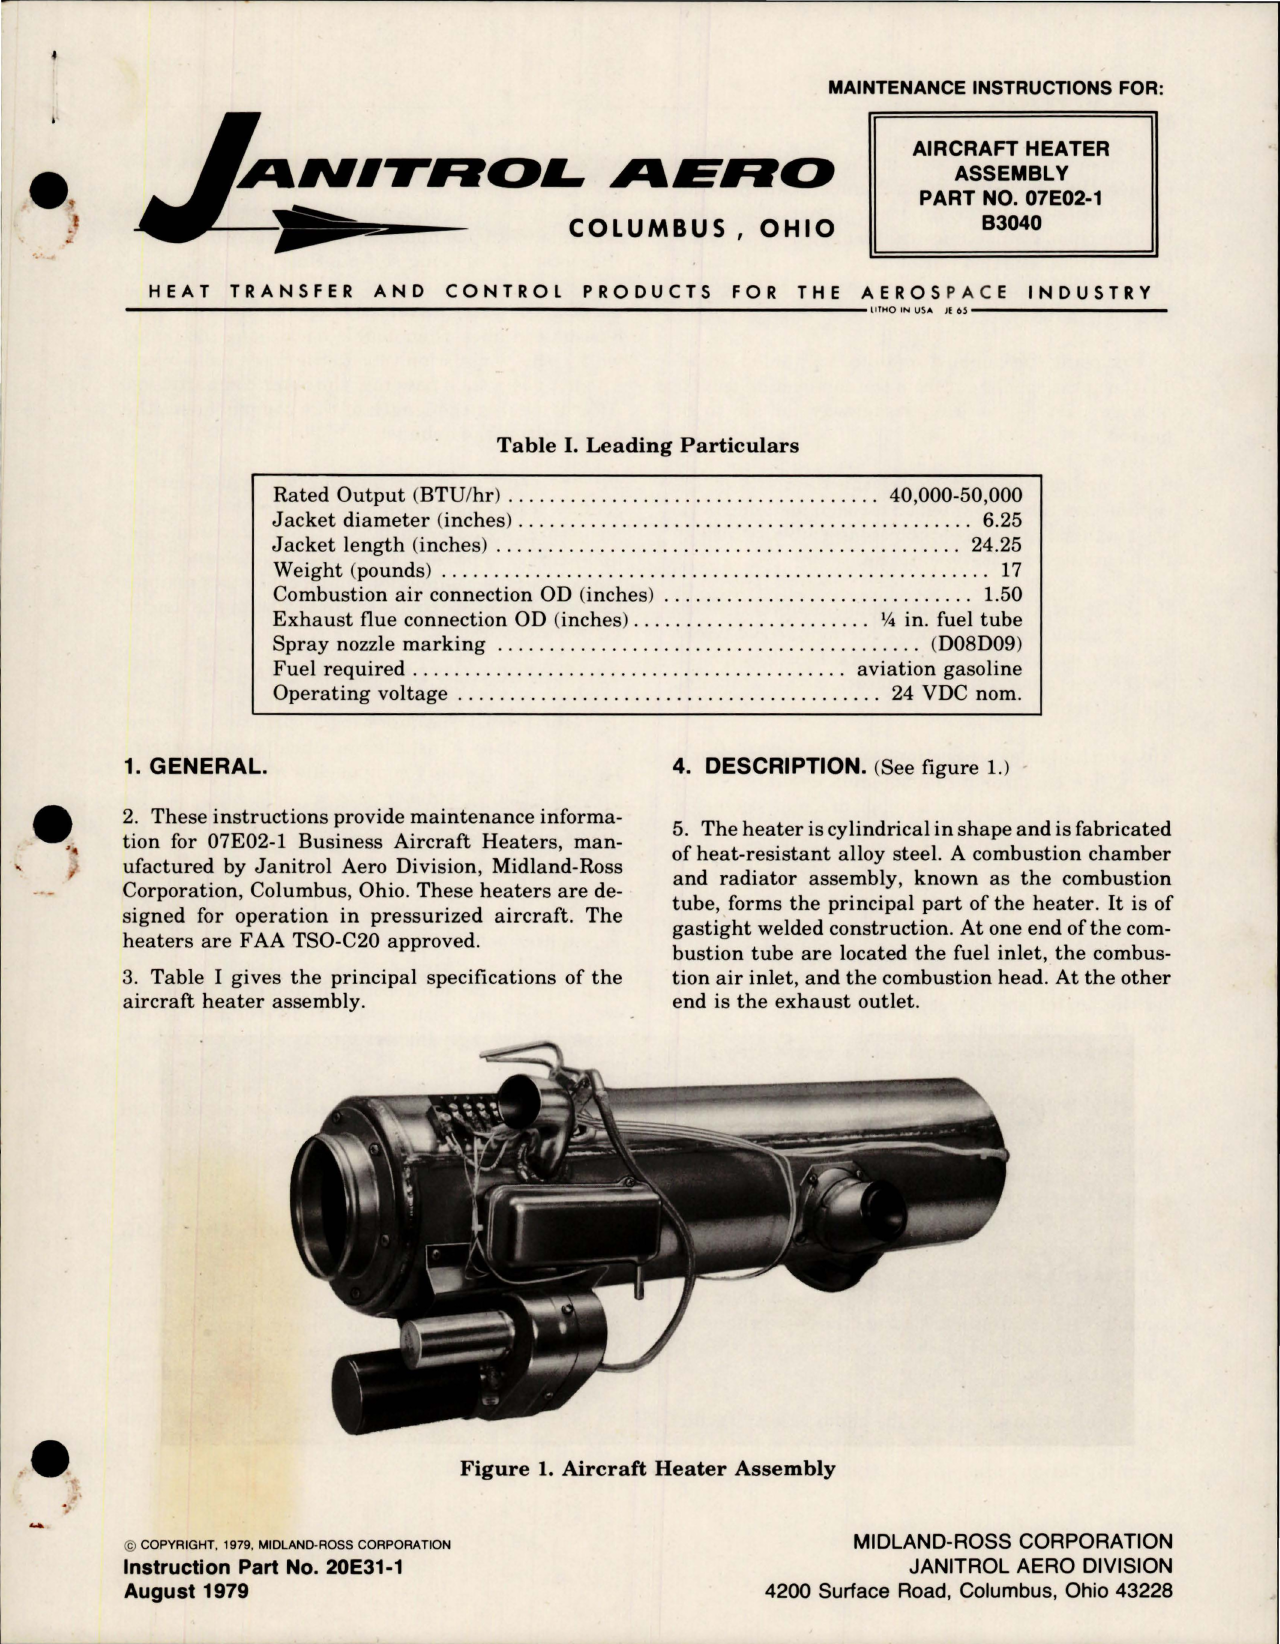 Sample page 1 from AirCorps Library document: Maintenance Instructions for Aircraft Heater Assembly - Part 07E02-1 - B3040 